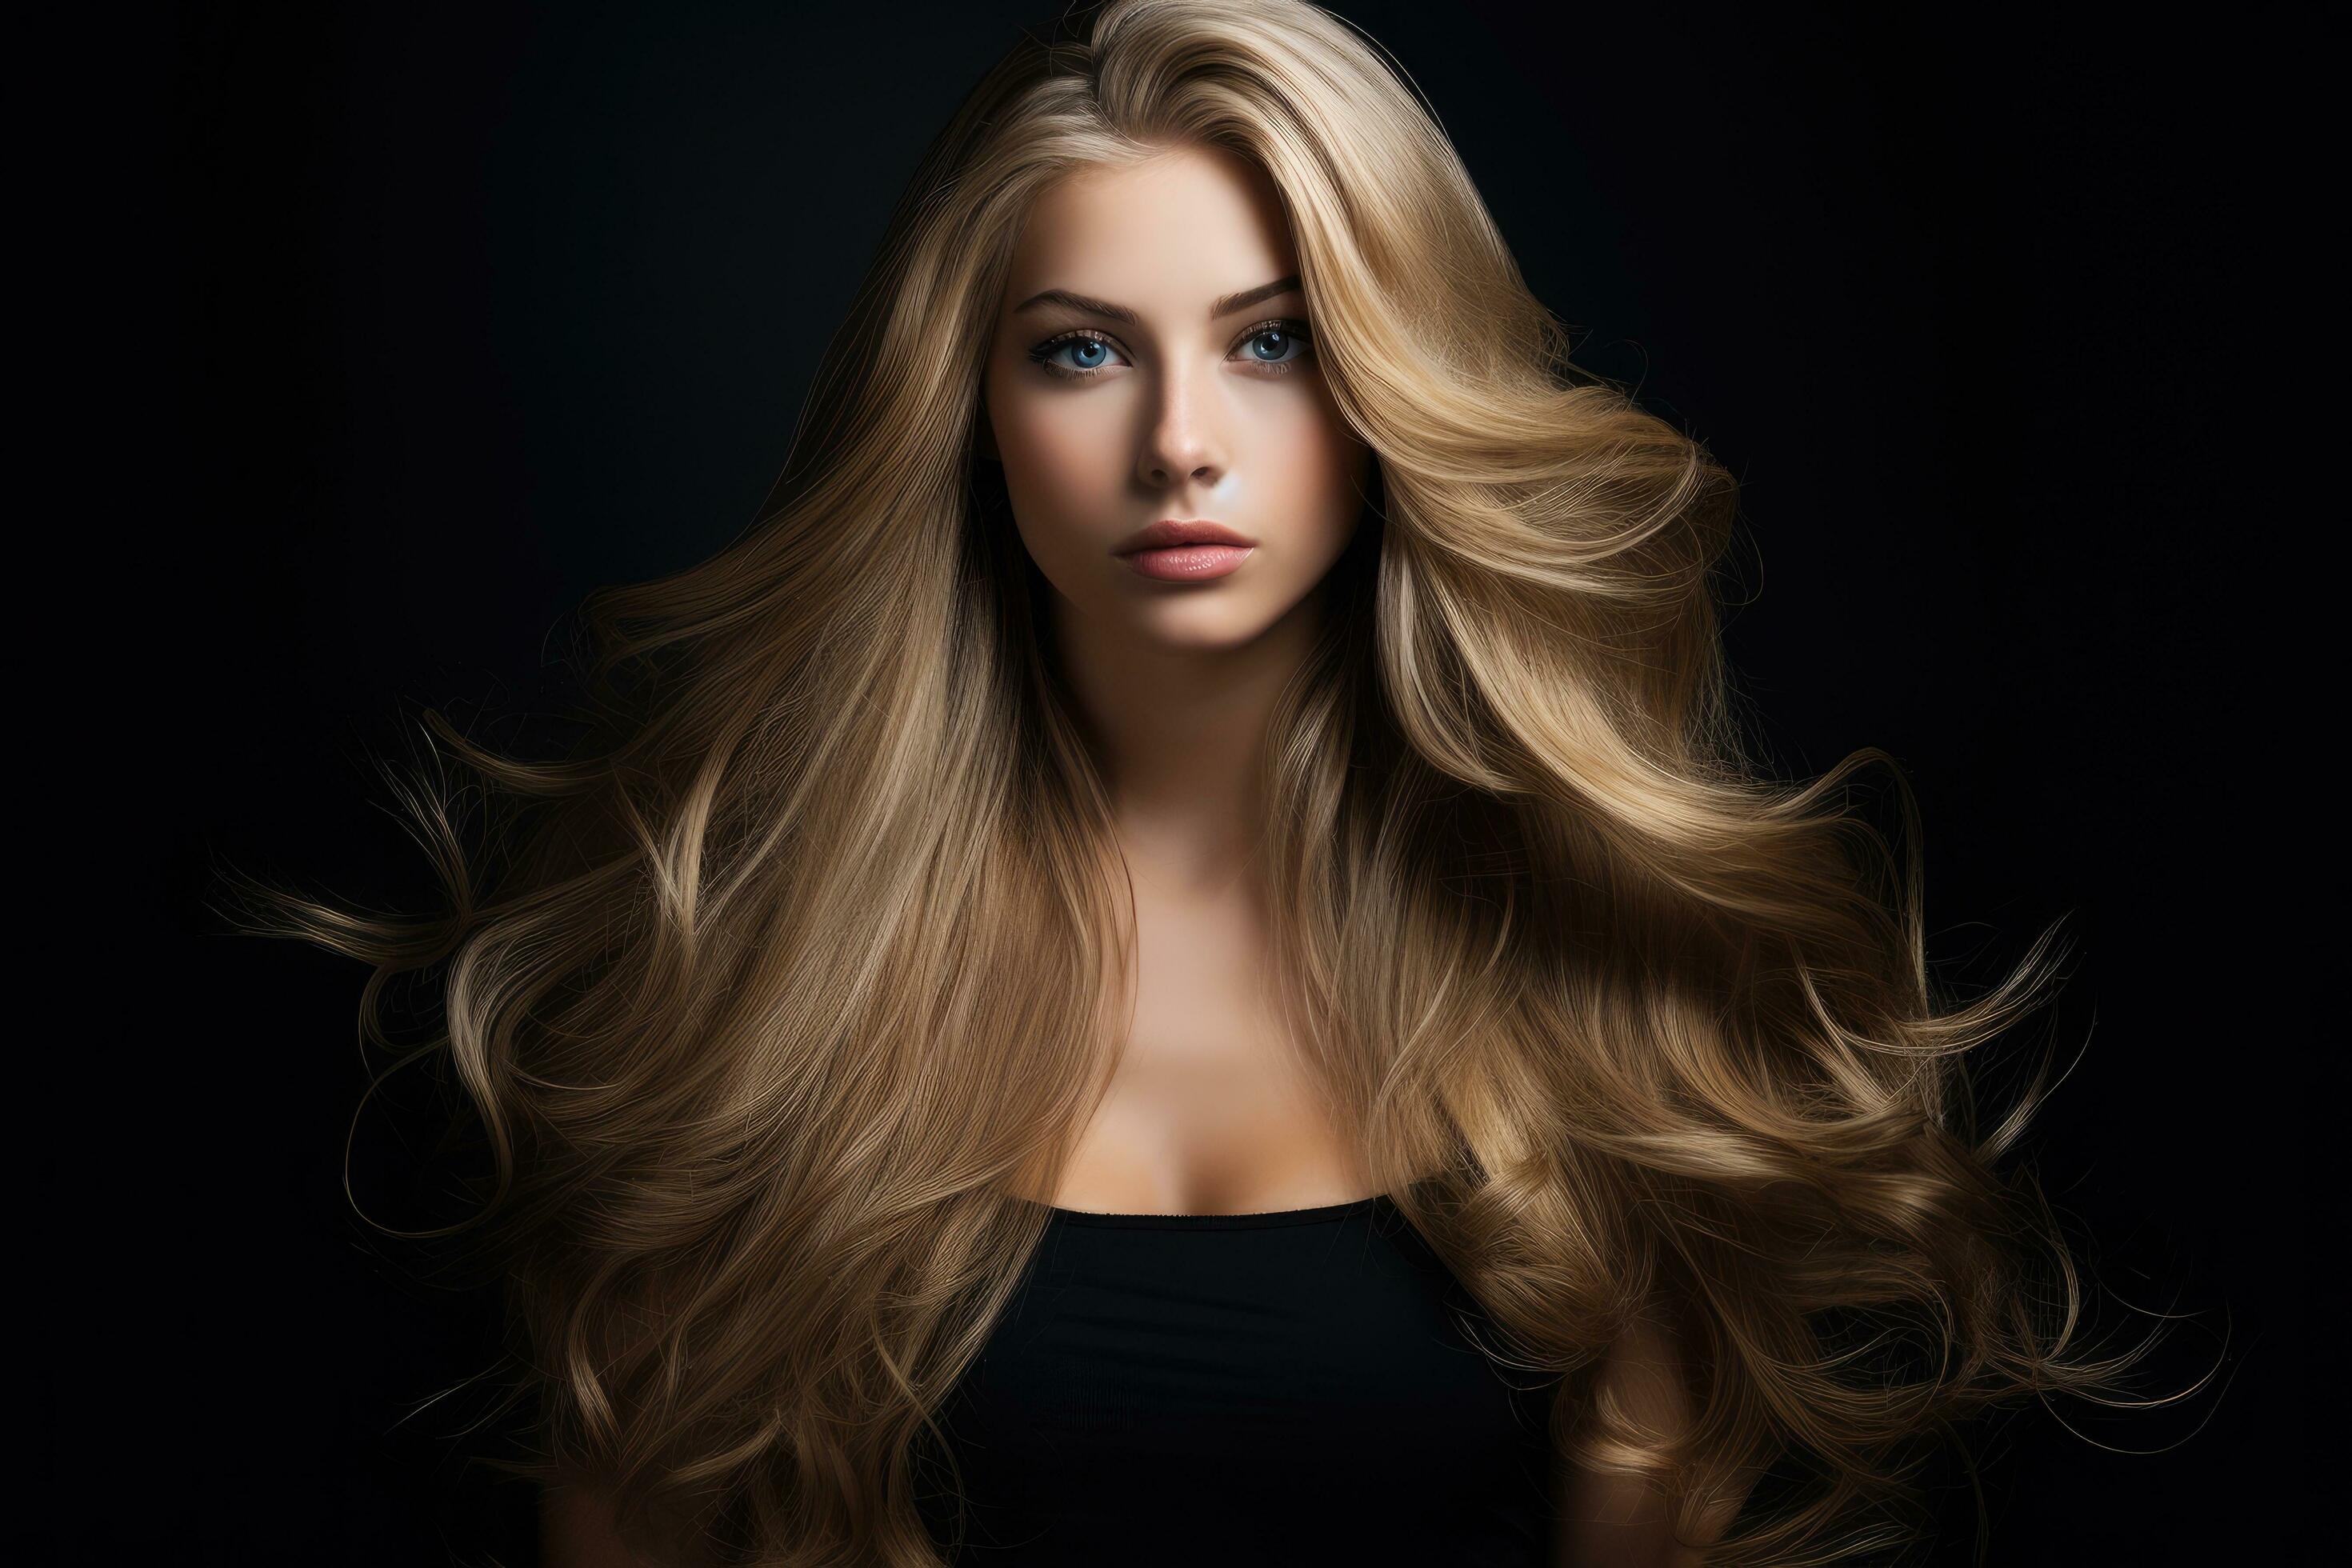 ai-generated-portrait-of-beautiful-young-woman-with-long-blond-hair-on-black-background-beautiful-girl-with-long-blonde-hair-on-dark-background-ai-generated-free-photo.jpg